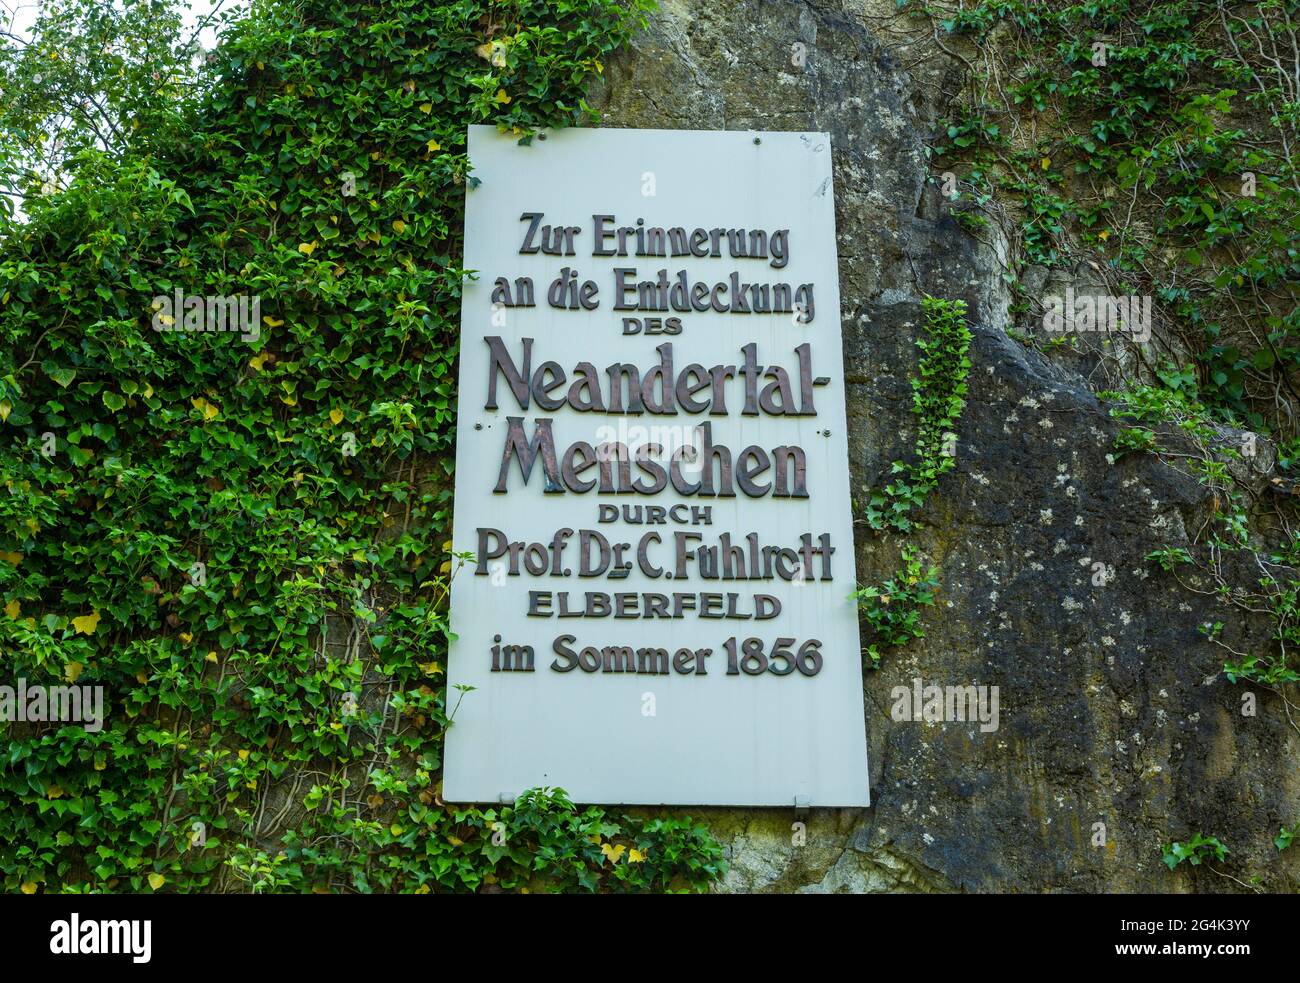 Germany, Erkrath, Bergisches Land, Niederbergisches Land, Niederberg, Rhineland, North Rhine-Westphalia, NRW, human history, excavations, archeological site Neandertal, Rabenstein Rock at the entrance to the provenance Feldhof Grotto where human remains of the Neanderthal man Homo sapiens neanderthalensis had been found, plaque of remembrance to Johann Carl Fuhlrott Stock Photo